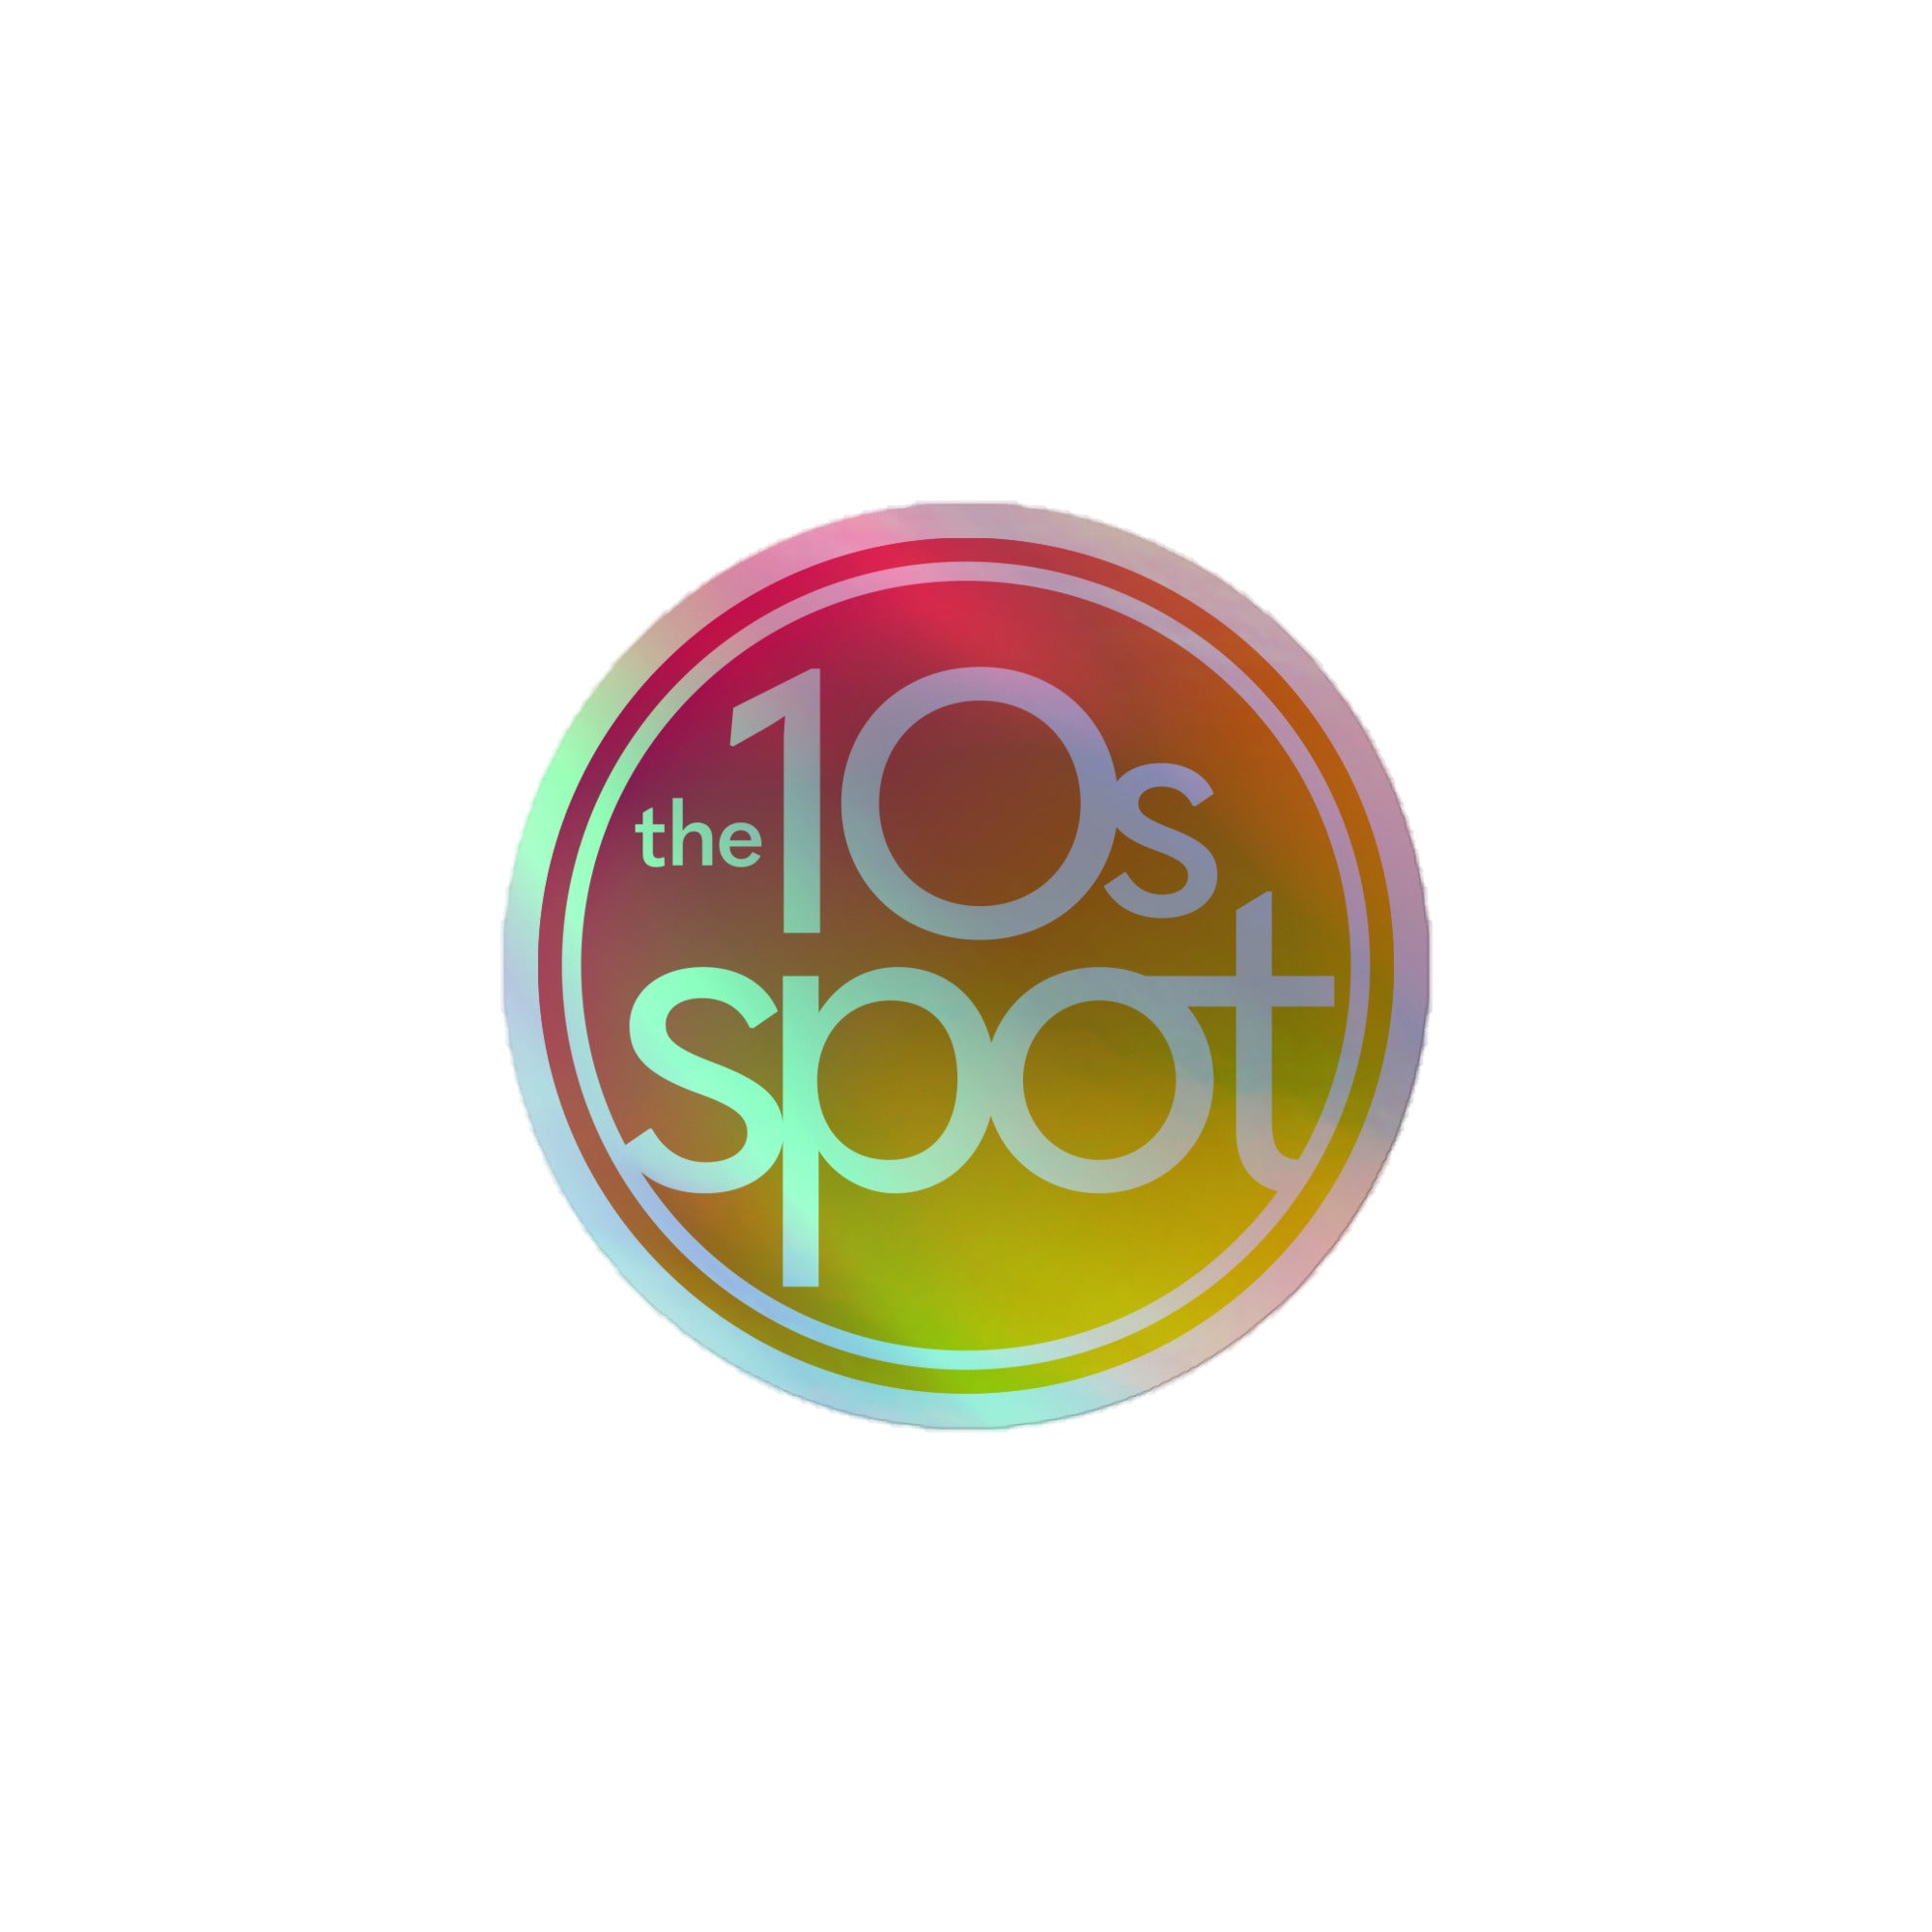 The 10s Spot: Holographic Sticker